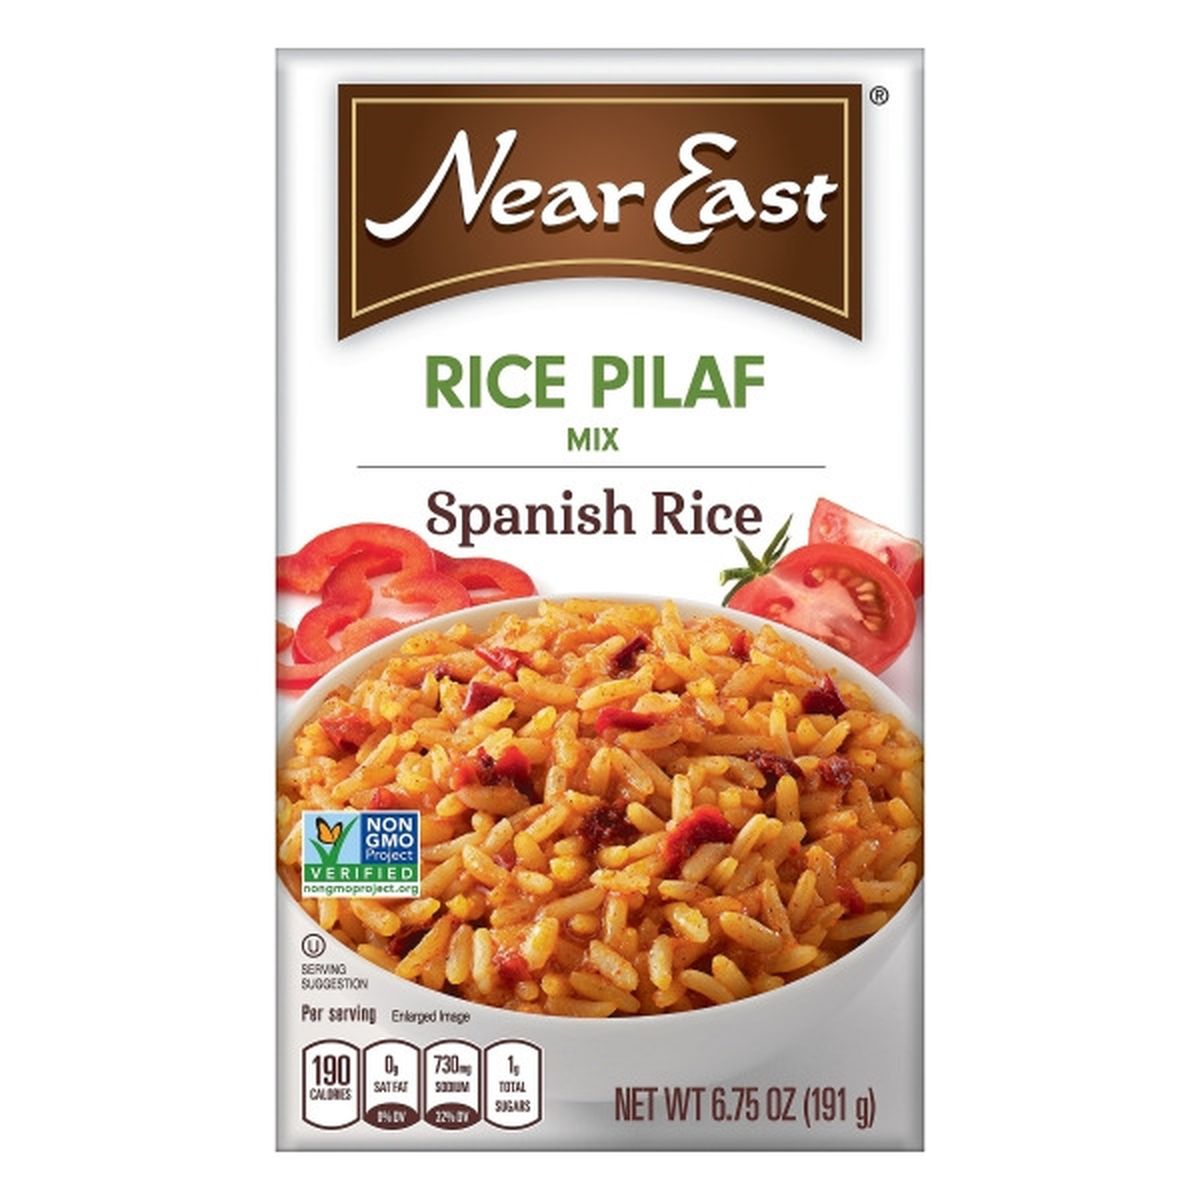 Calories in Near East Rice Pilaf Mix, Spanish